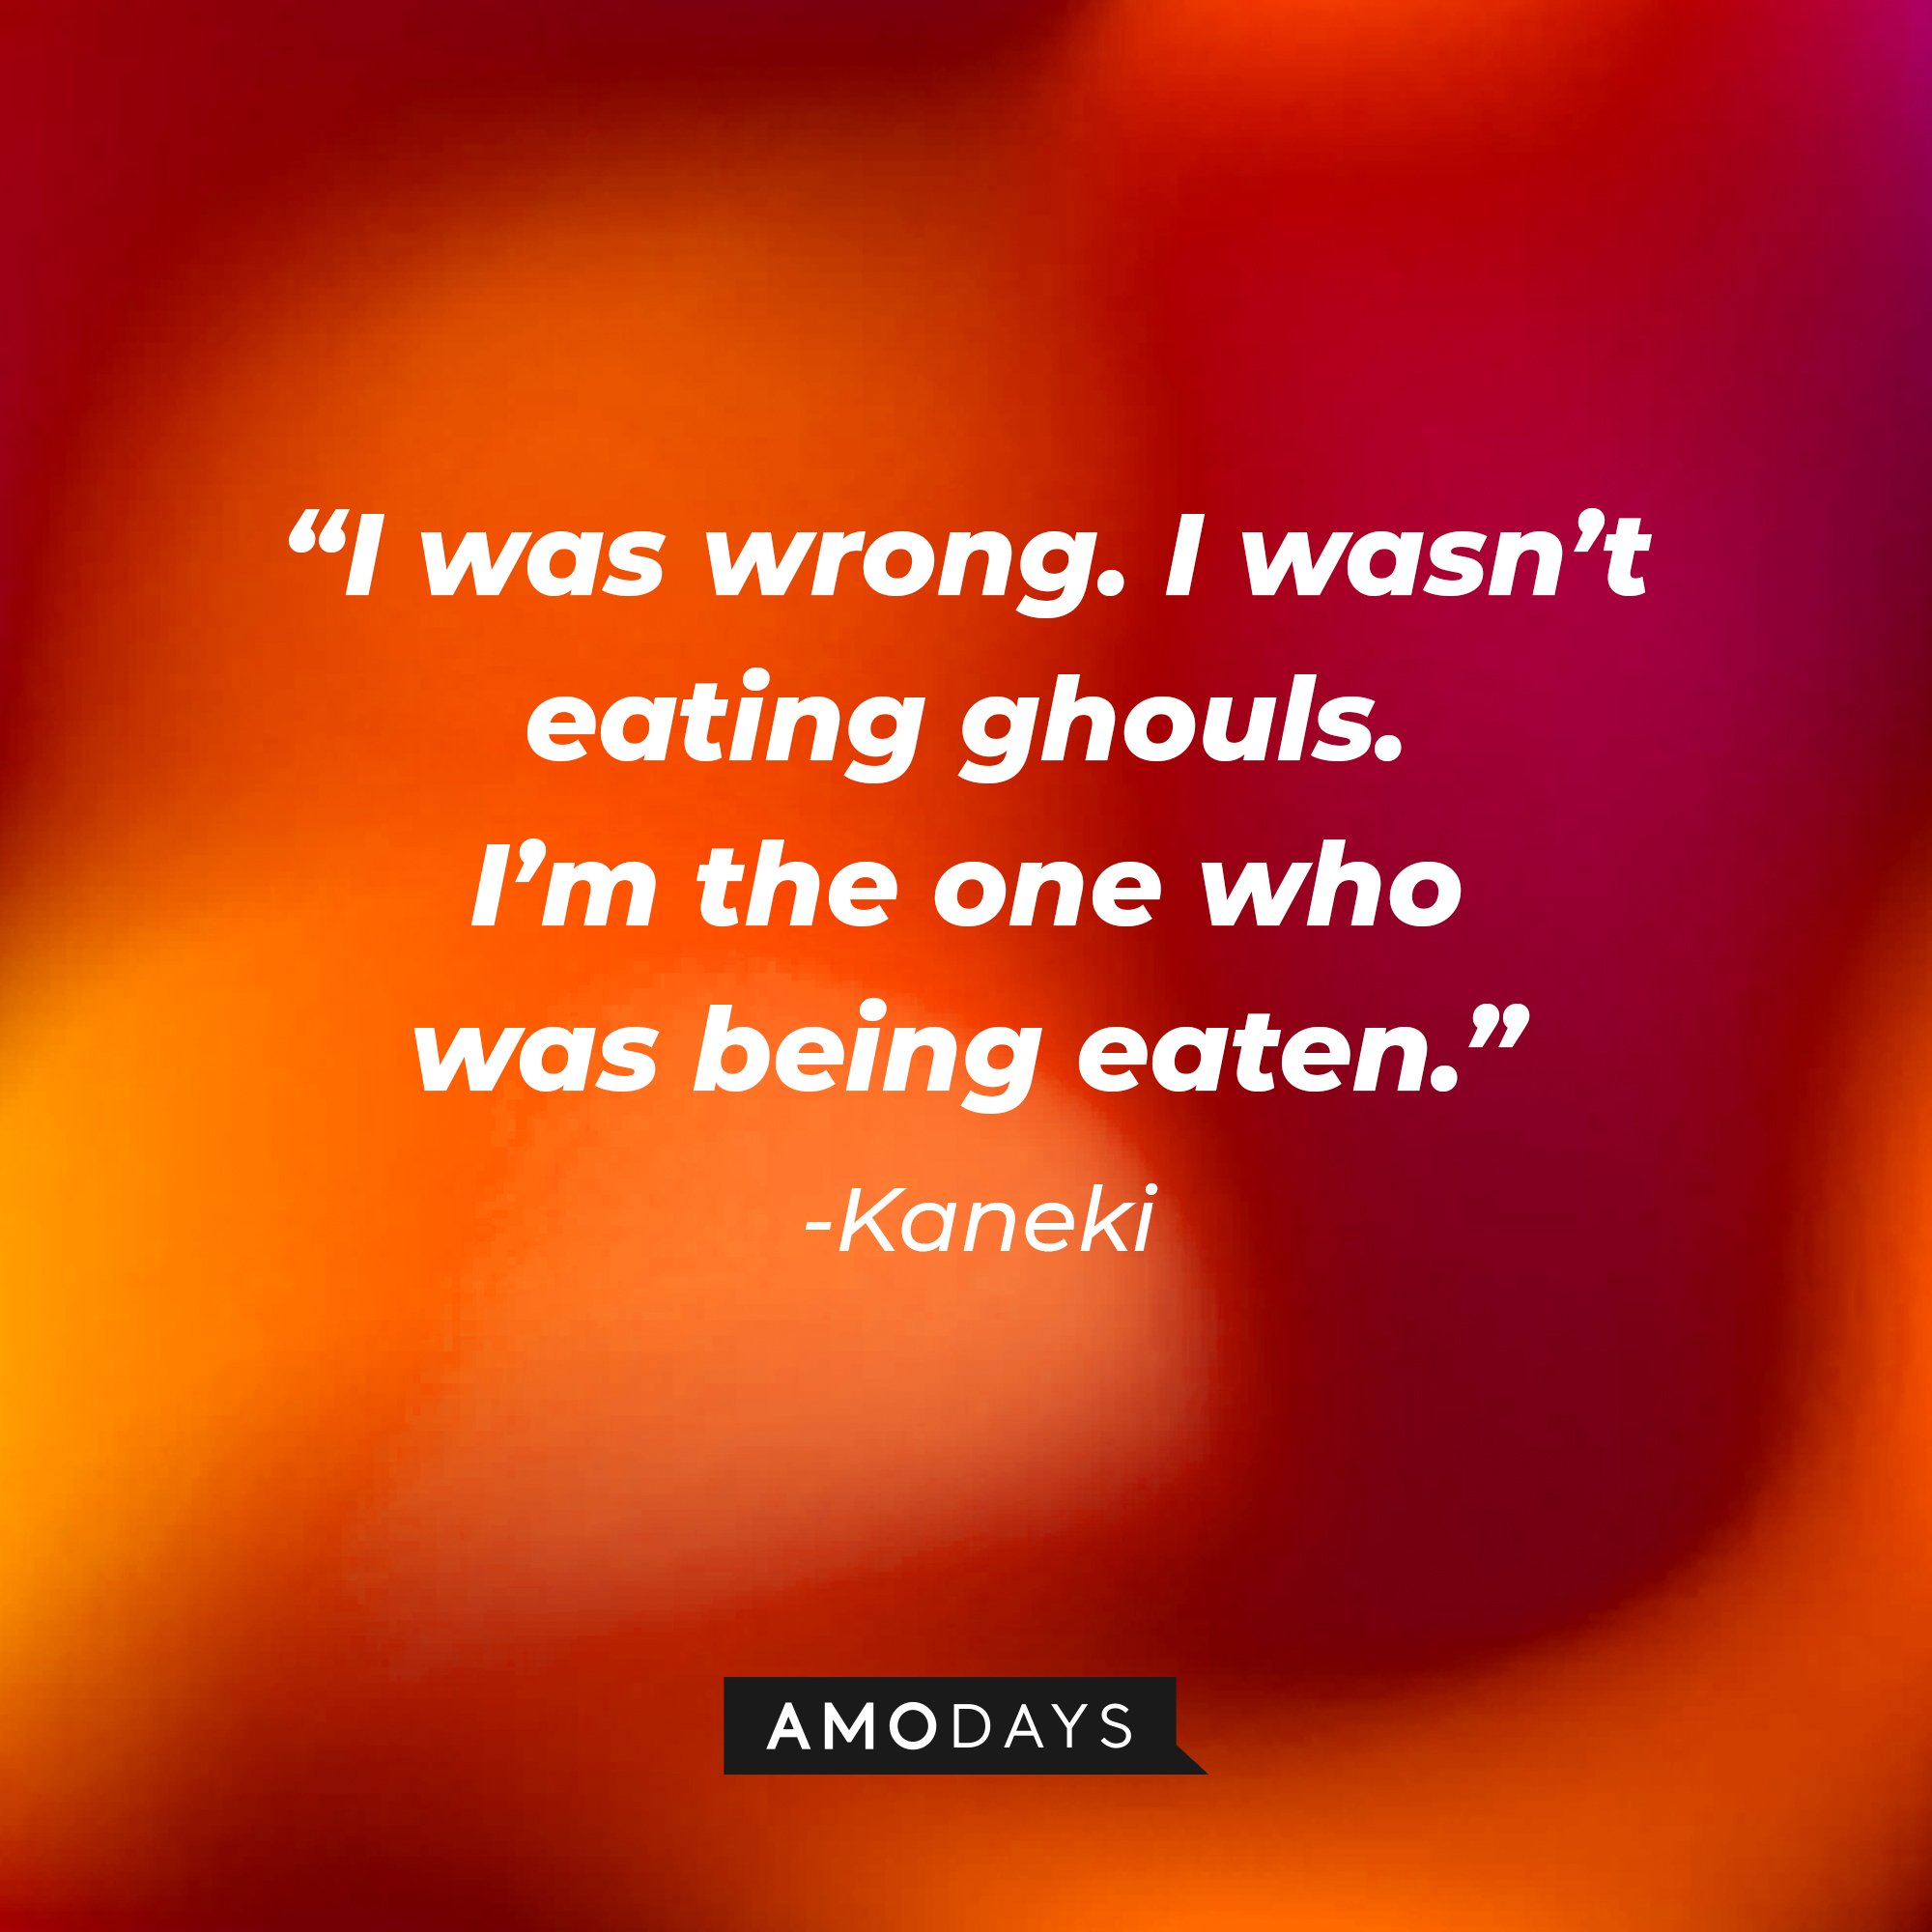 Kaneki's quote: “I was wrong. I wasn’t eating ghouls. I’m the one who was being eaten.” | Image: AmoDays